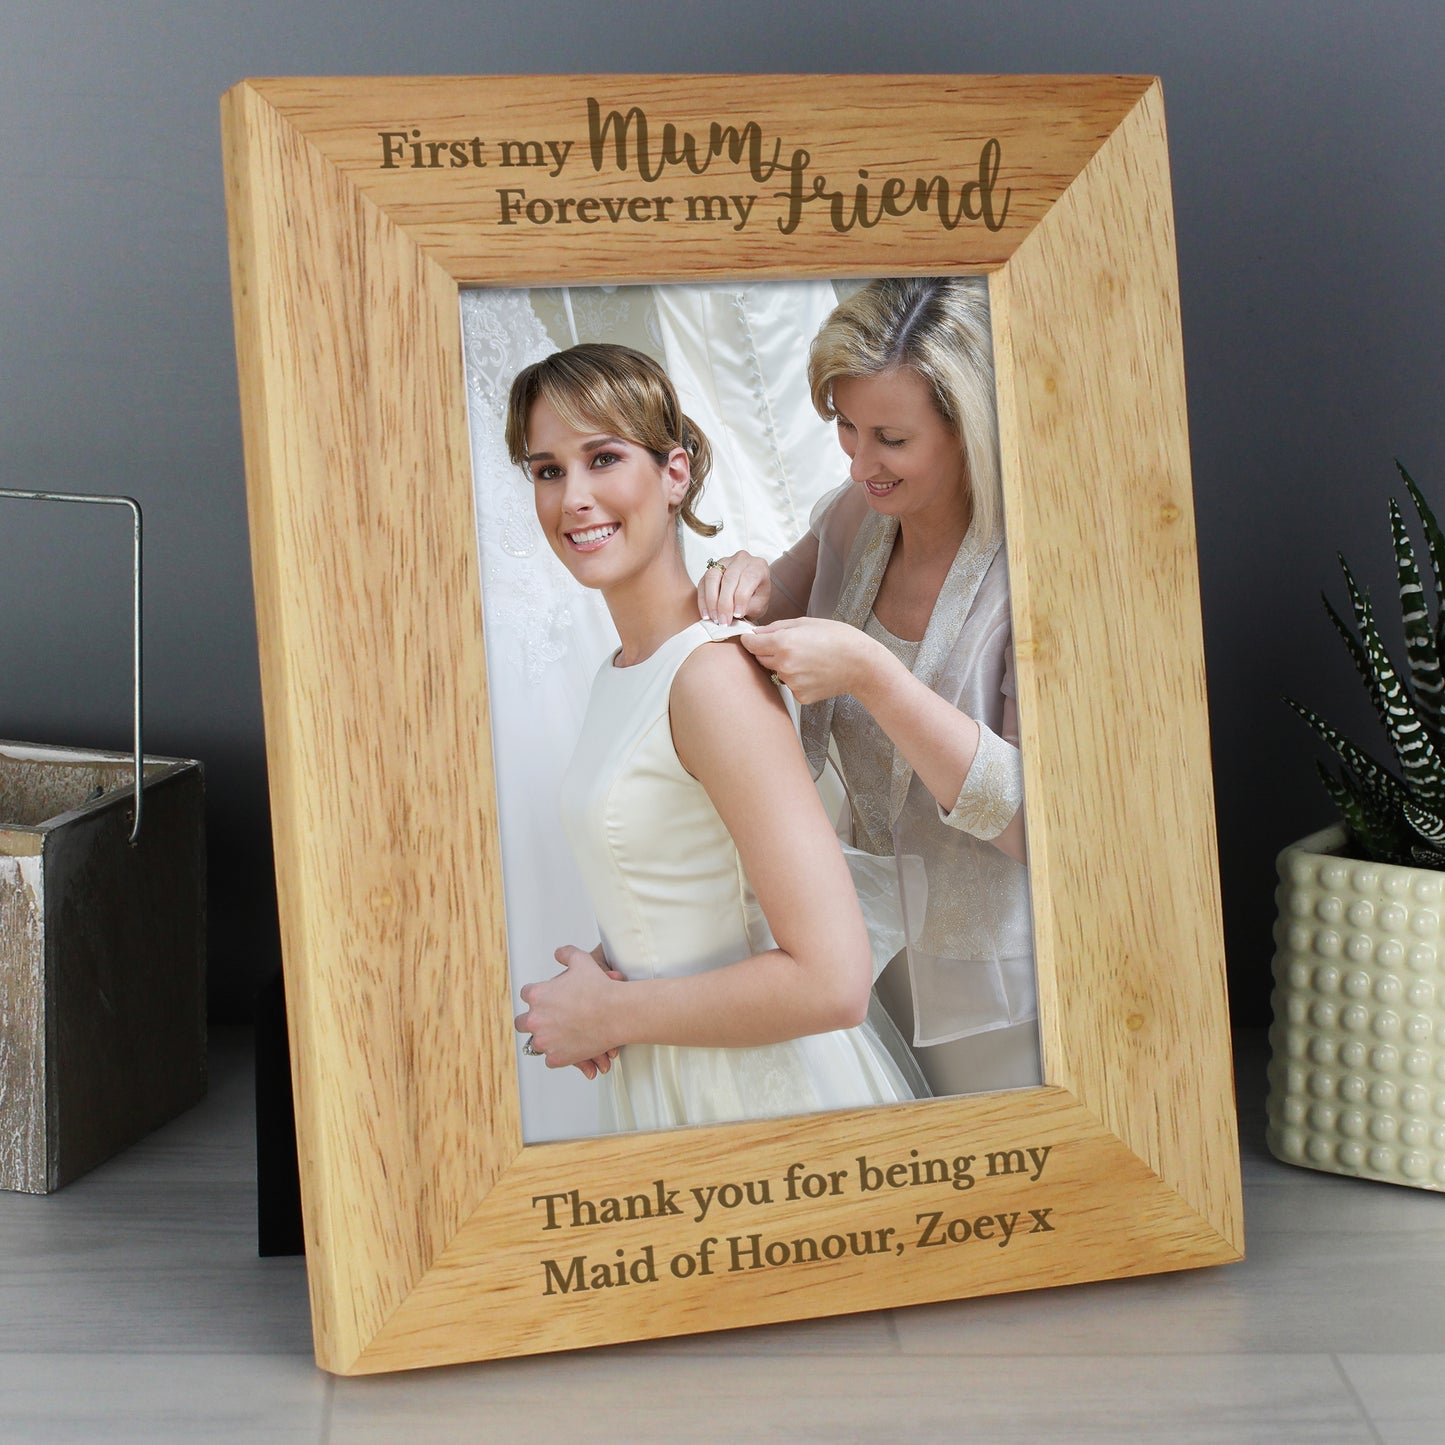 Personalised First My Mum Forever My Friend 5x7 Wooden Photo Frame - Personalise It!